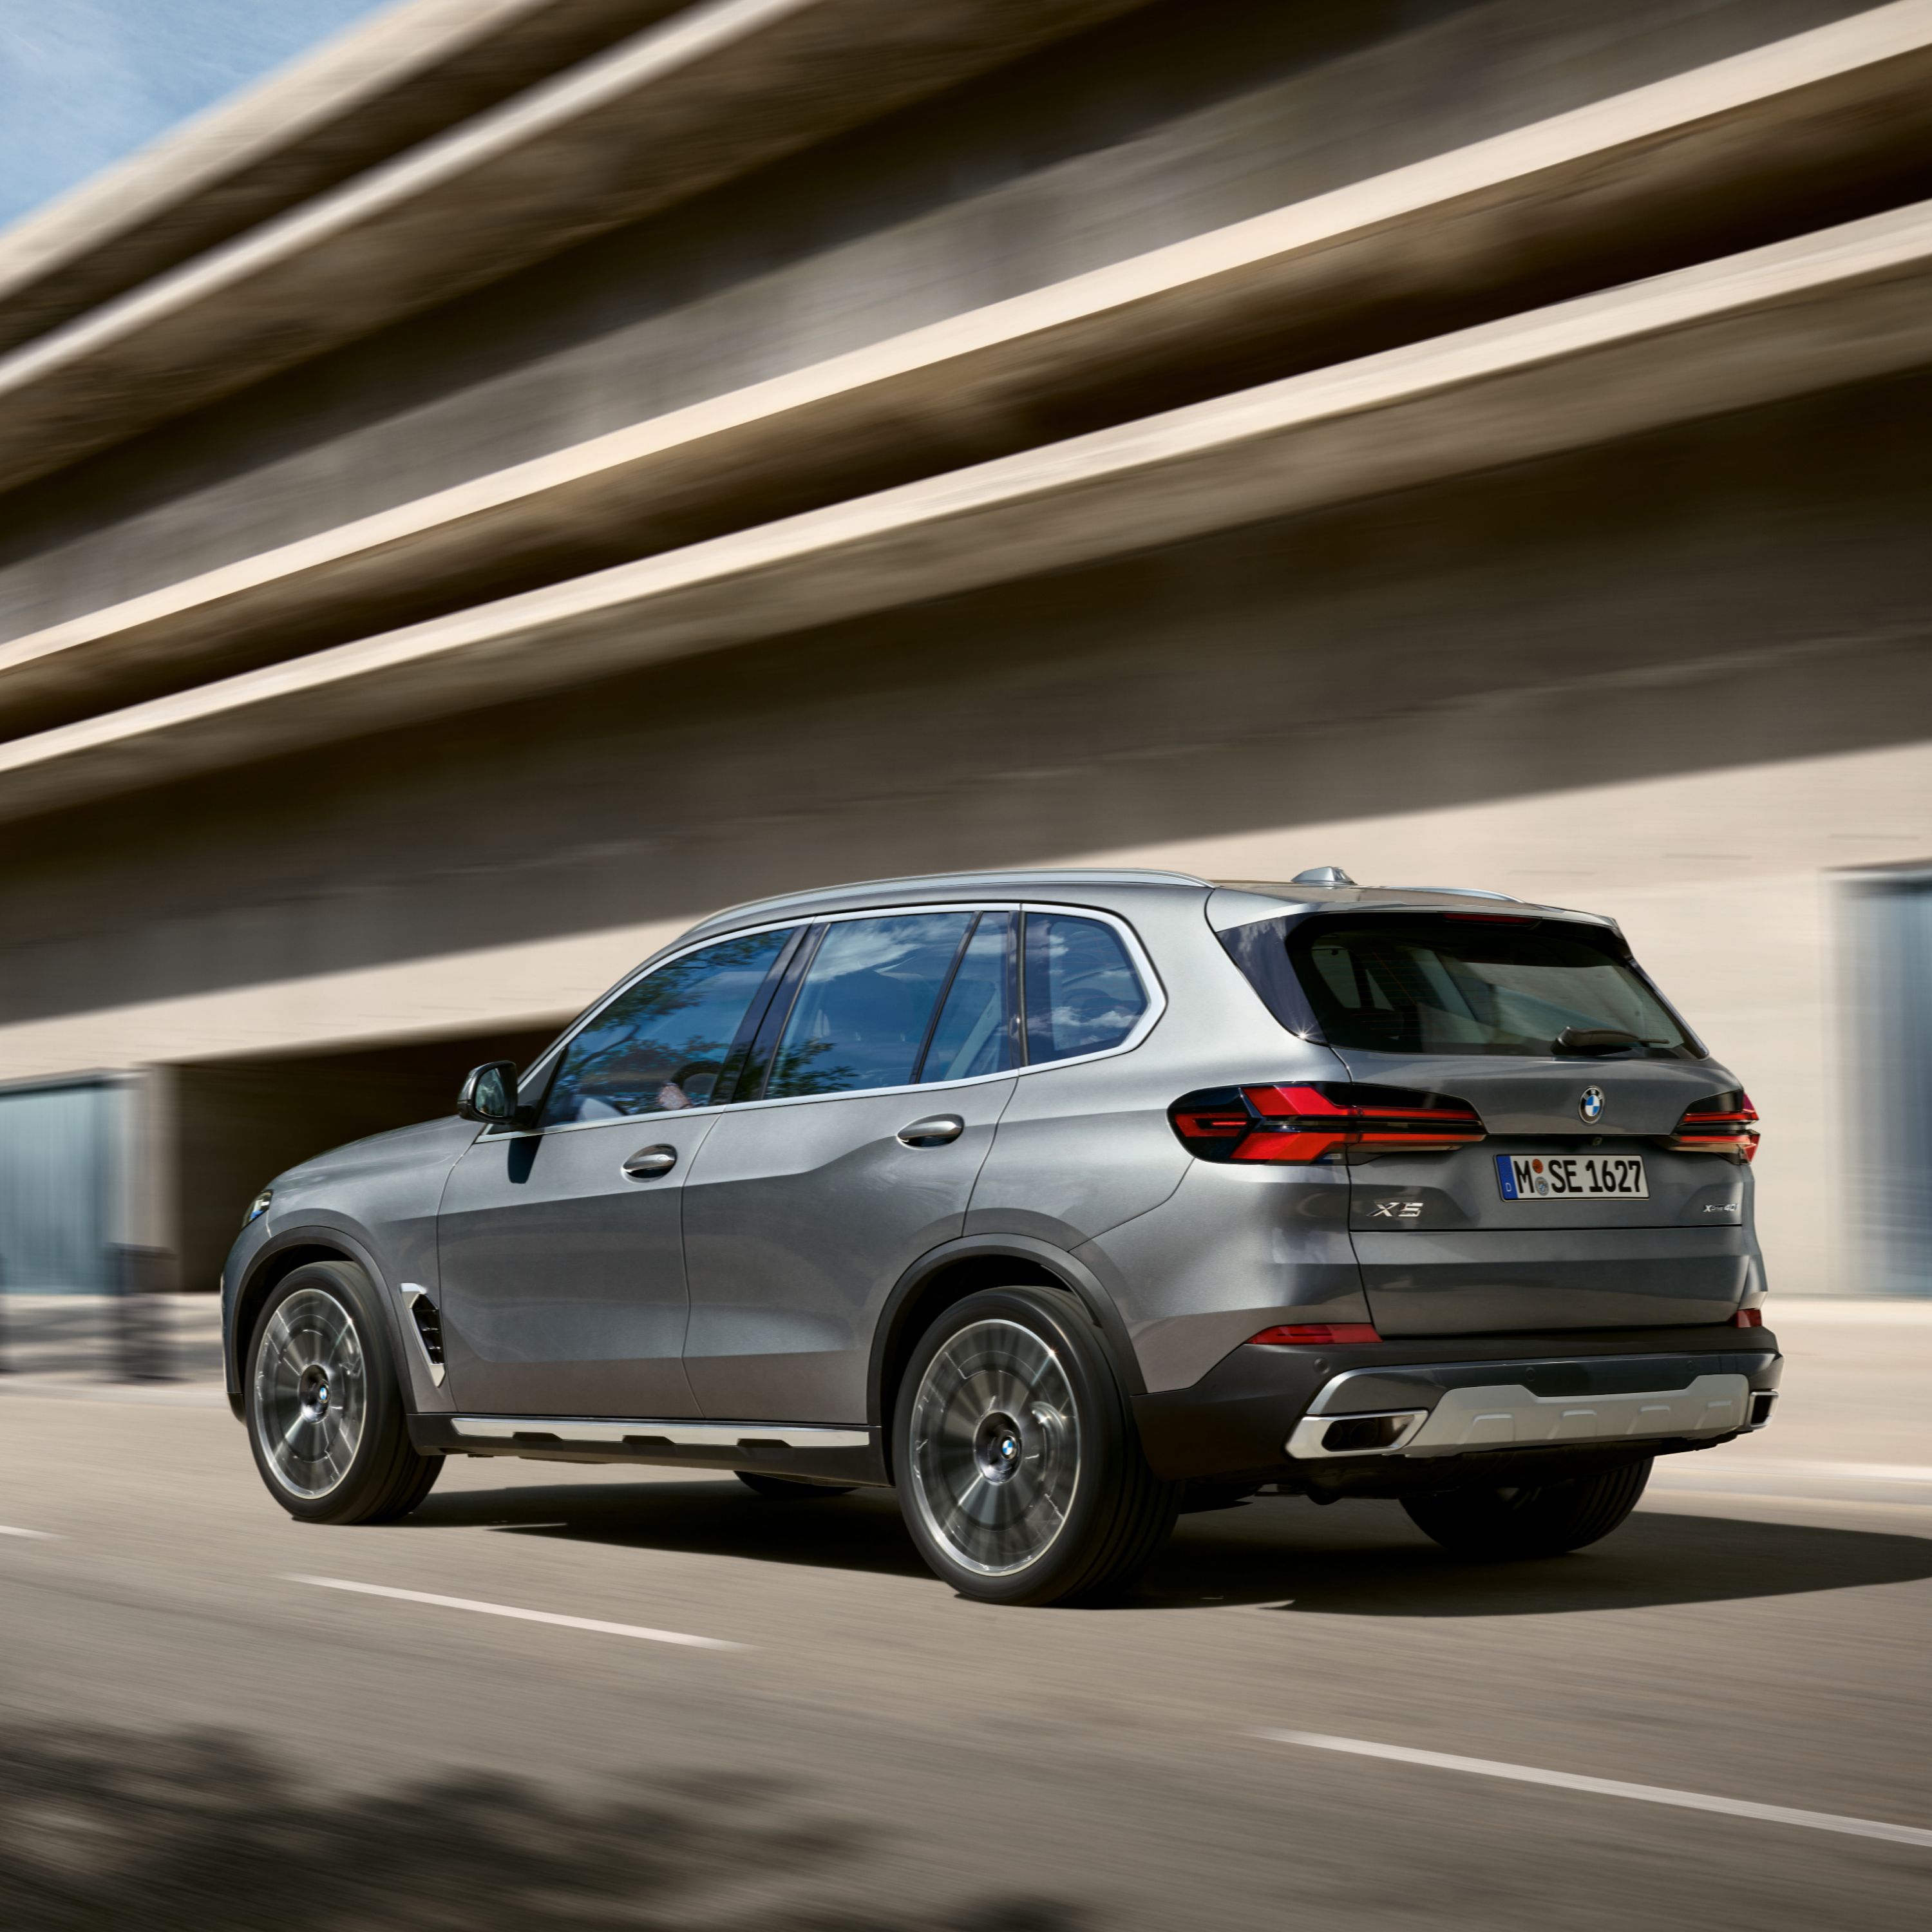 BMW X5 G05 SUV with facelift and a modern office building in the background